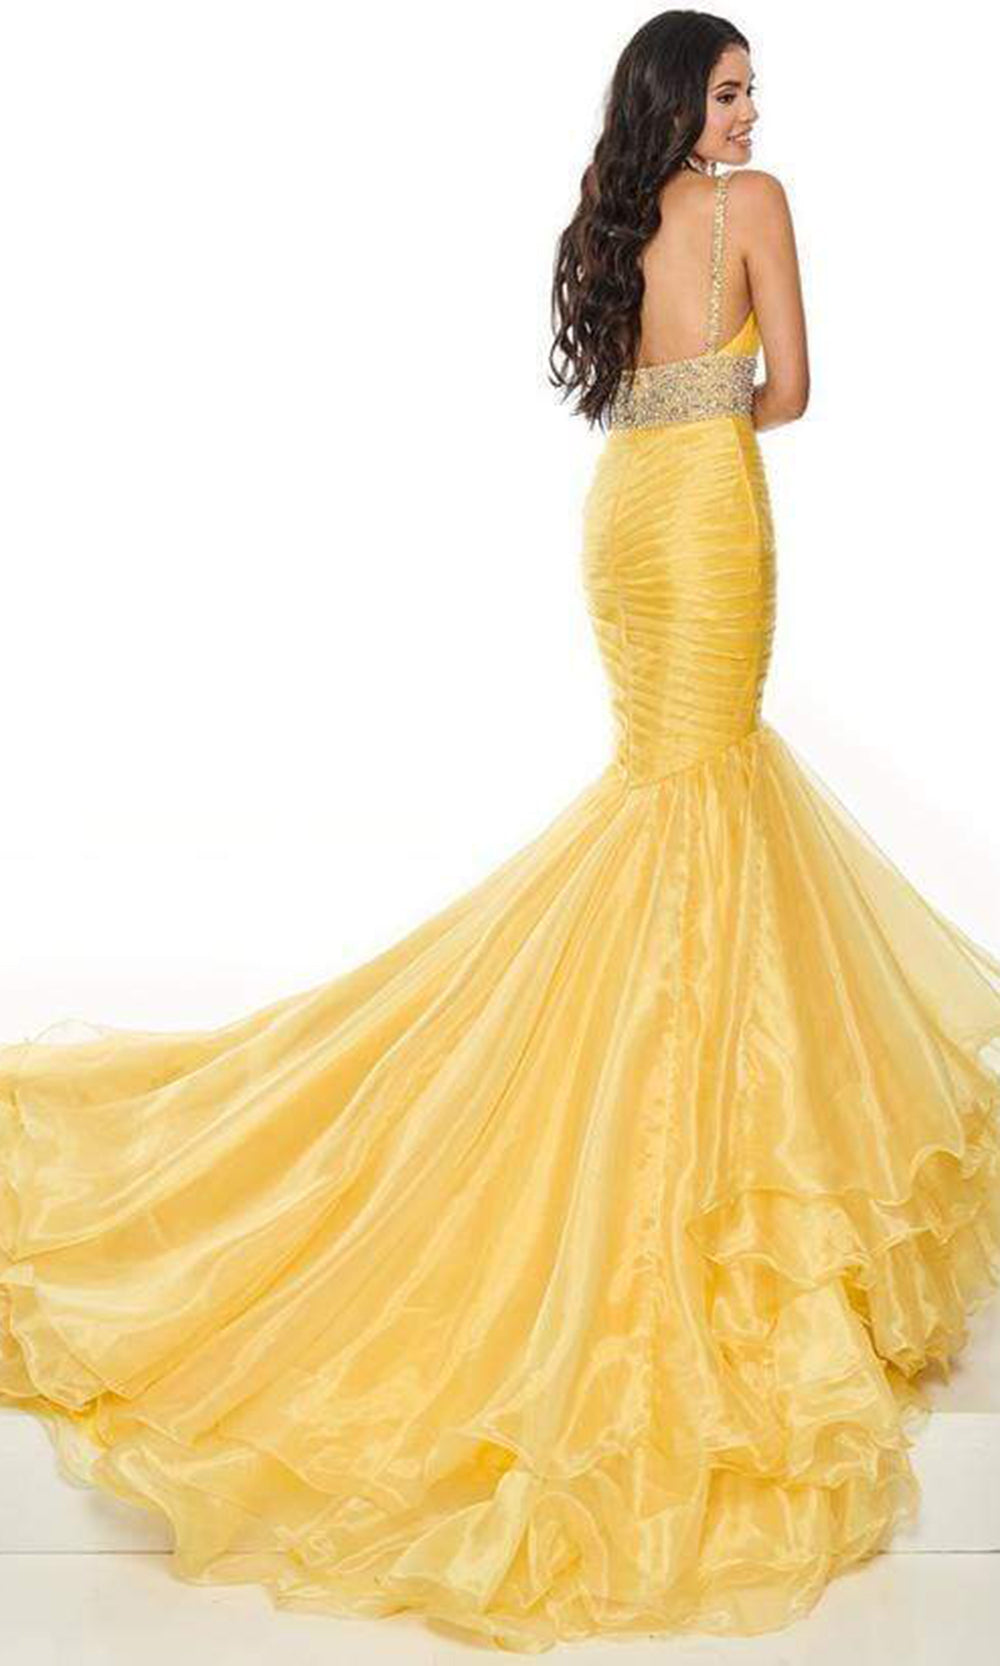 Rachel Allan - Pleated V-Neckline Embellished Mermaid Dress 5108 - 1 pc Yellow In Size 6 Available CCSALE 6 / Yellow